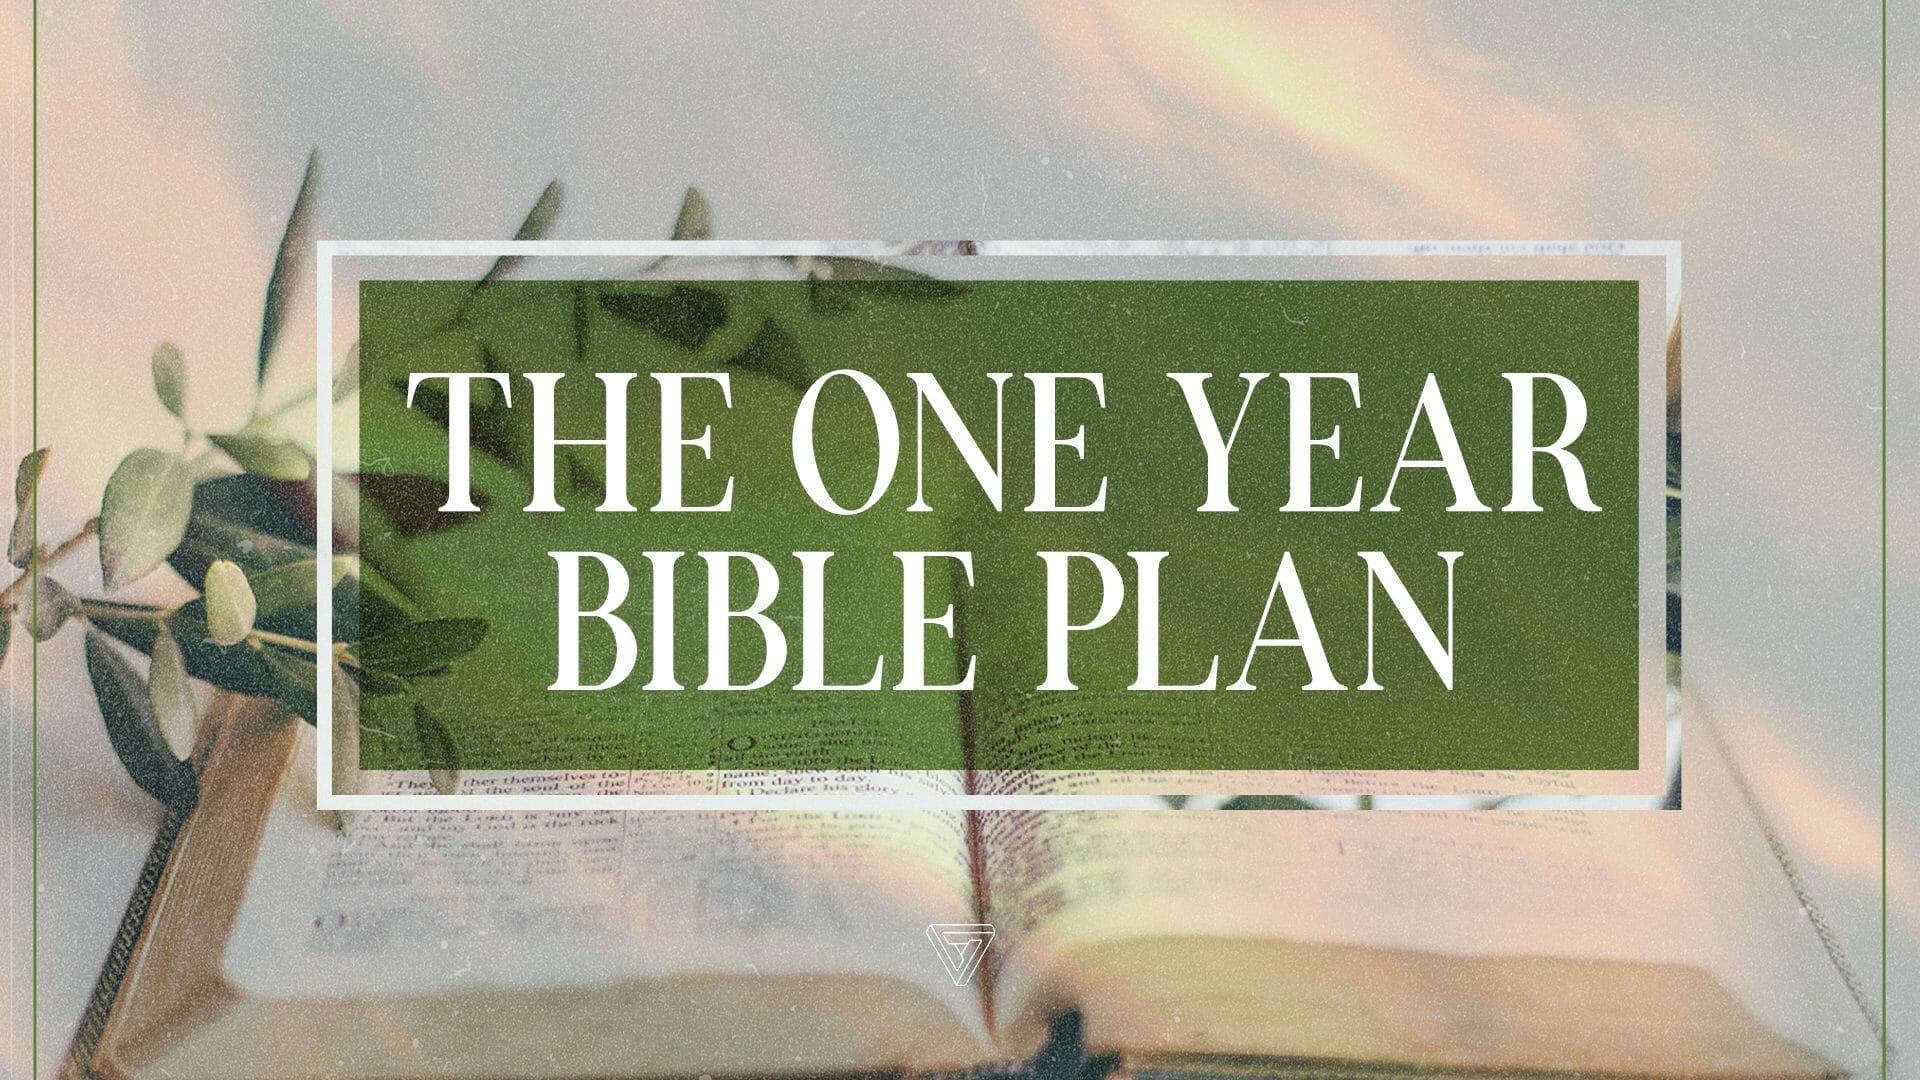 The One Year Bible Plan